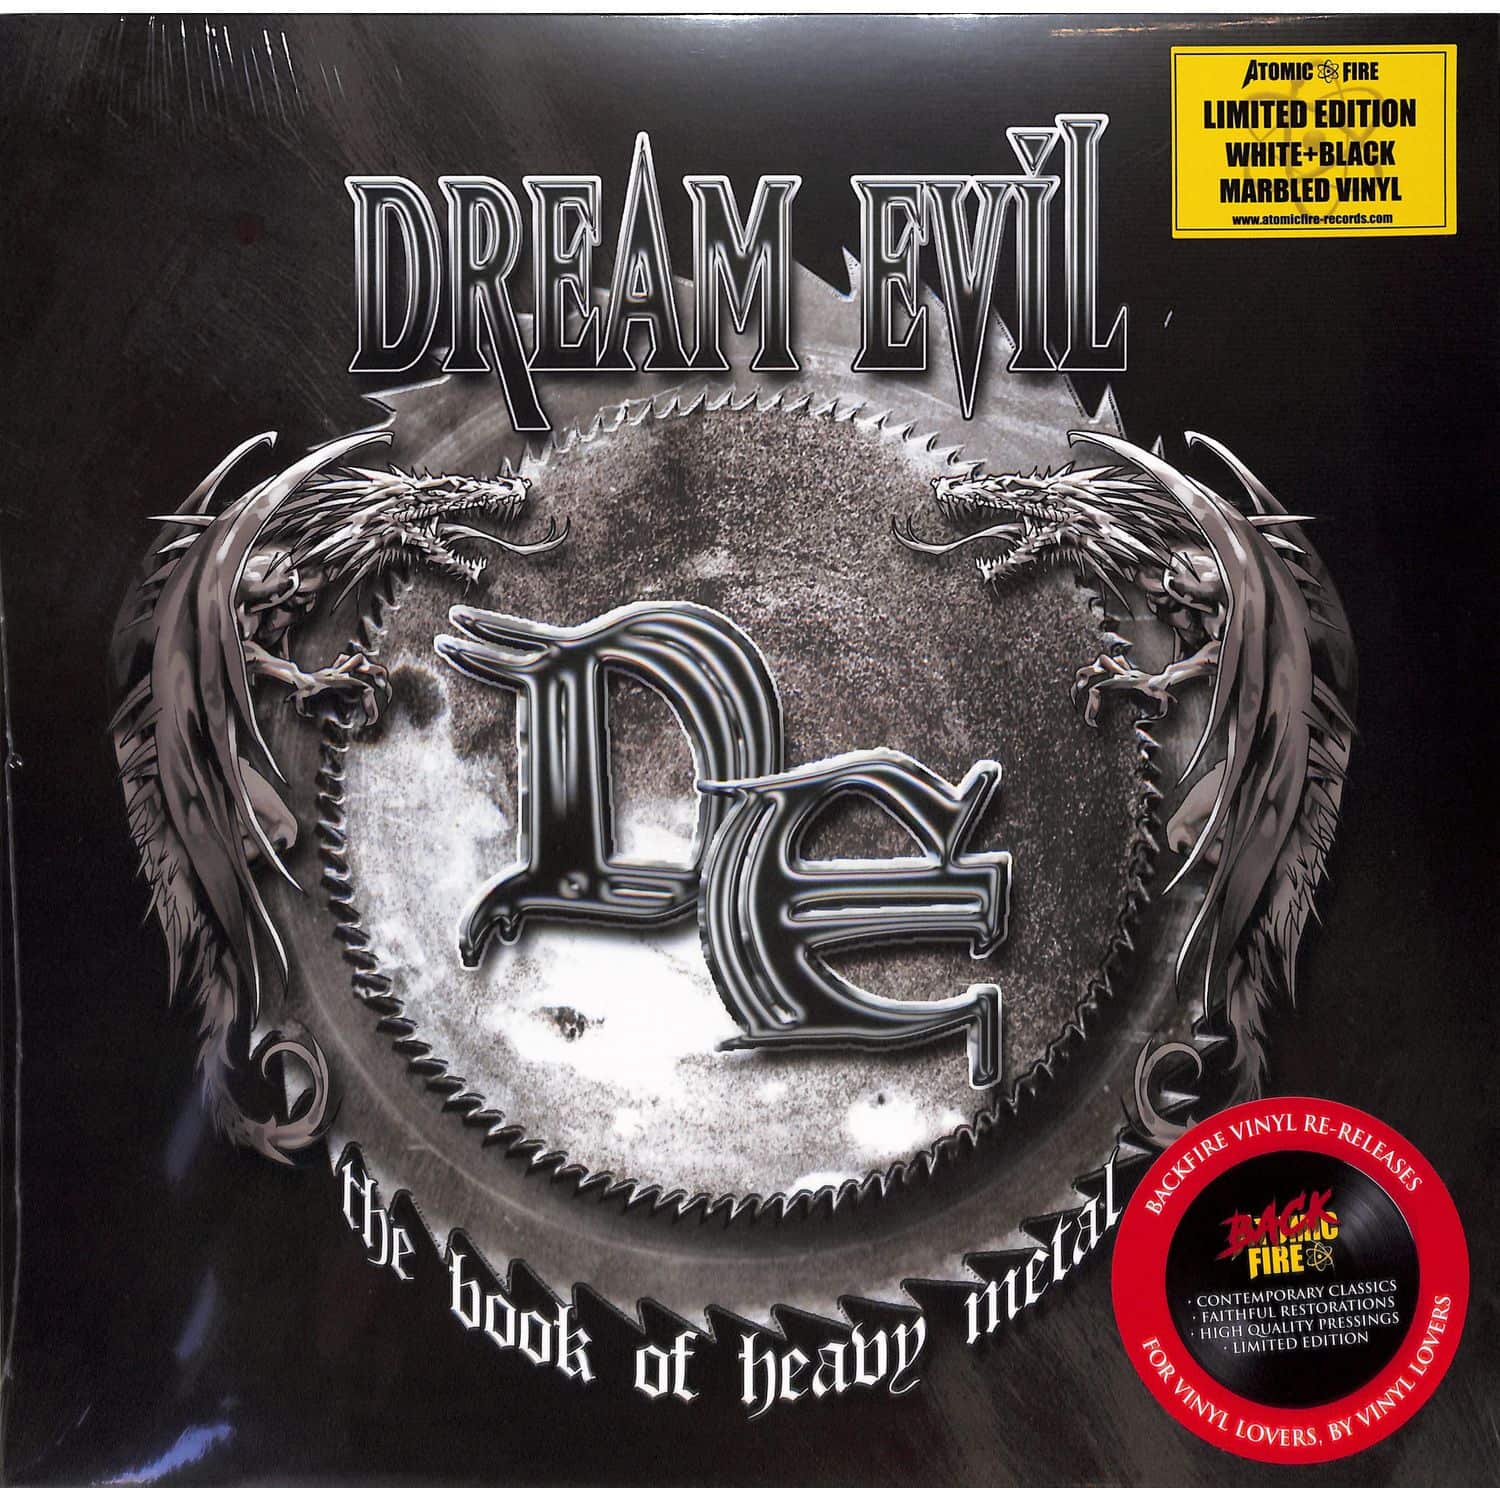 Dream Evil - THE BOOK OF HEAVY METAL 